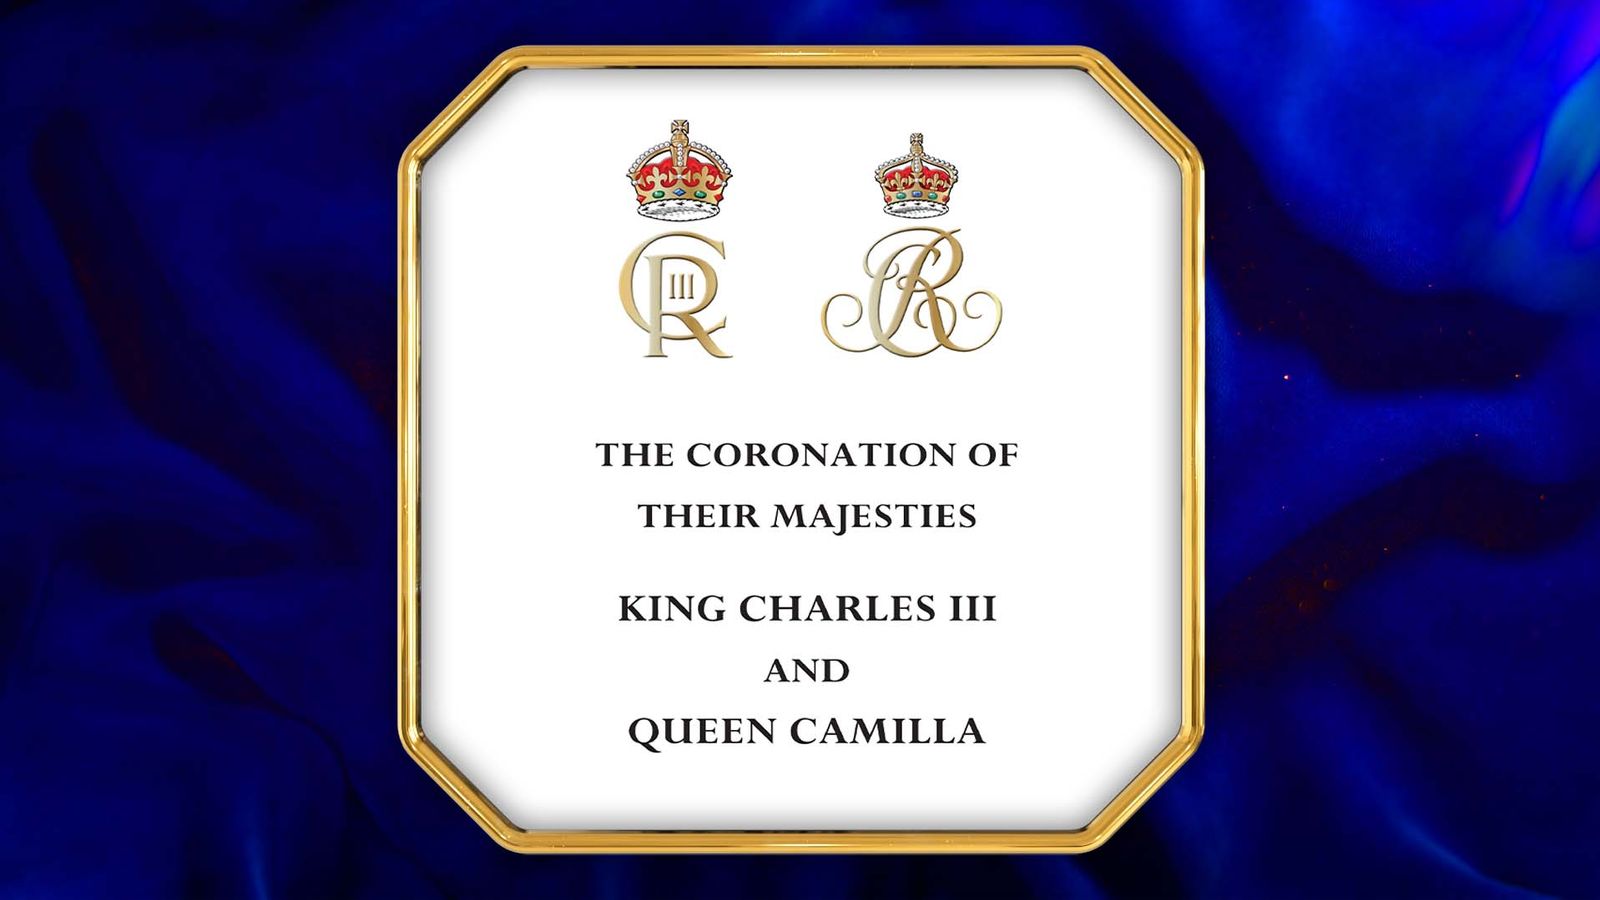 King's coronation order of service: Follow ceremony including hymns, prayers and readings